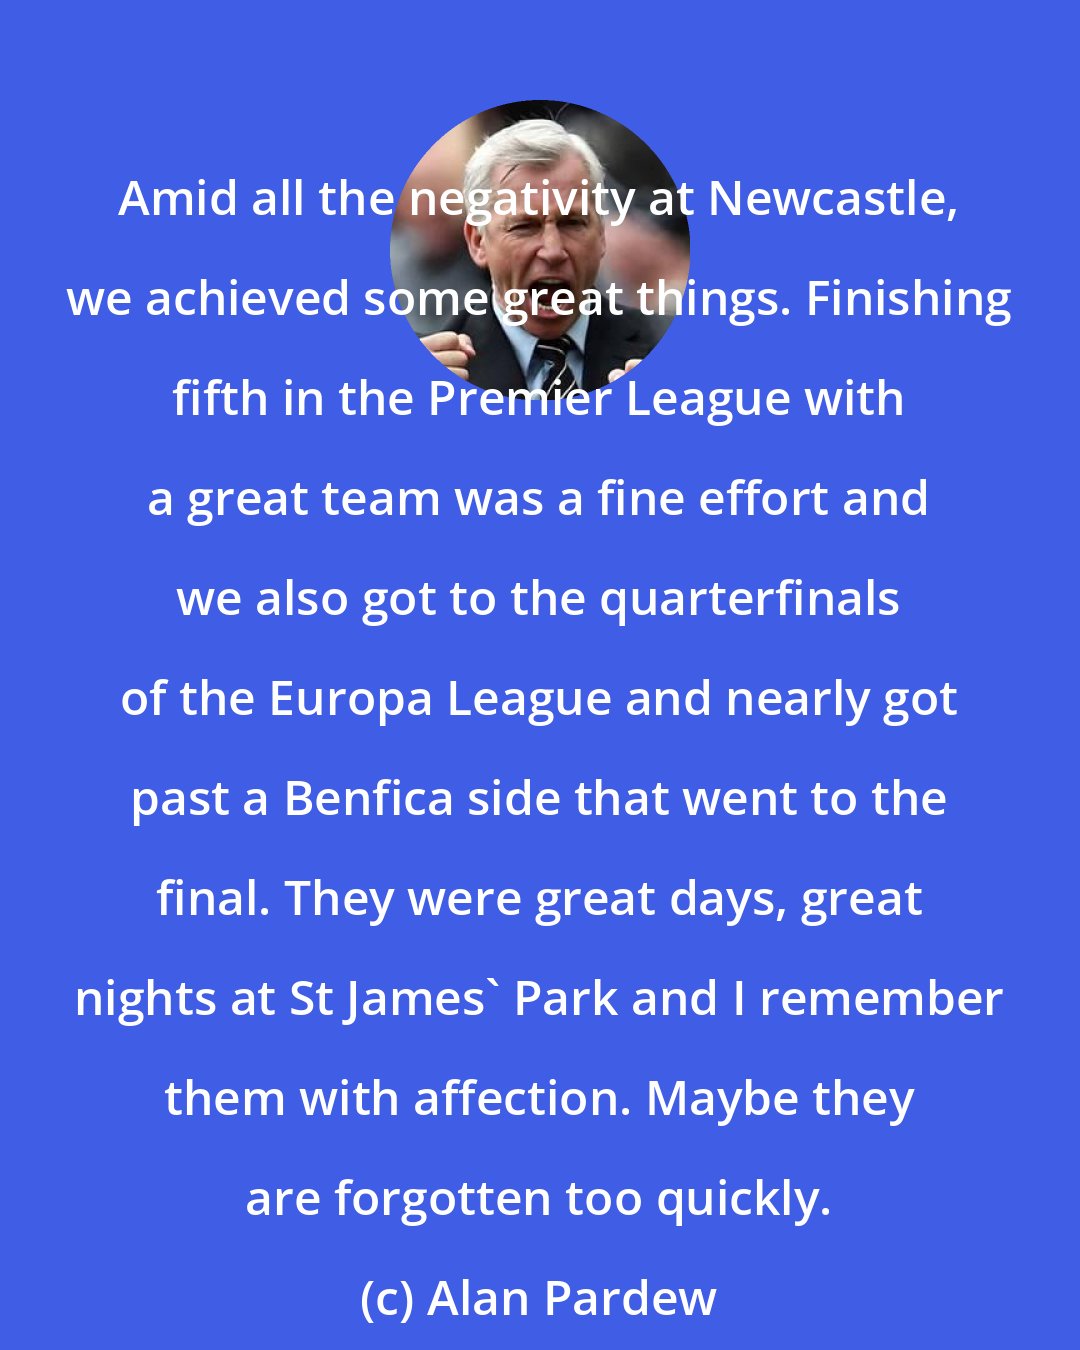 Alan Pardew: Amid all the negativity at Newcastle, we achieved some great things. Finishing fifth in the Premier League with a great team was a fine effort and we also got to the quarterfinals of the Europa League and nearly got past a Benfica side that went to the final. They were great days, great nights at St James' Park and I remember them with affection. Maybe they are forgotten too quickly.